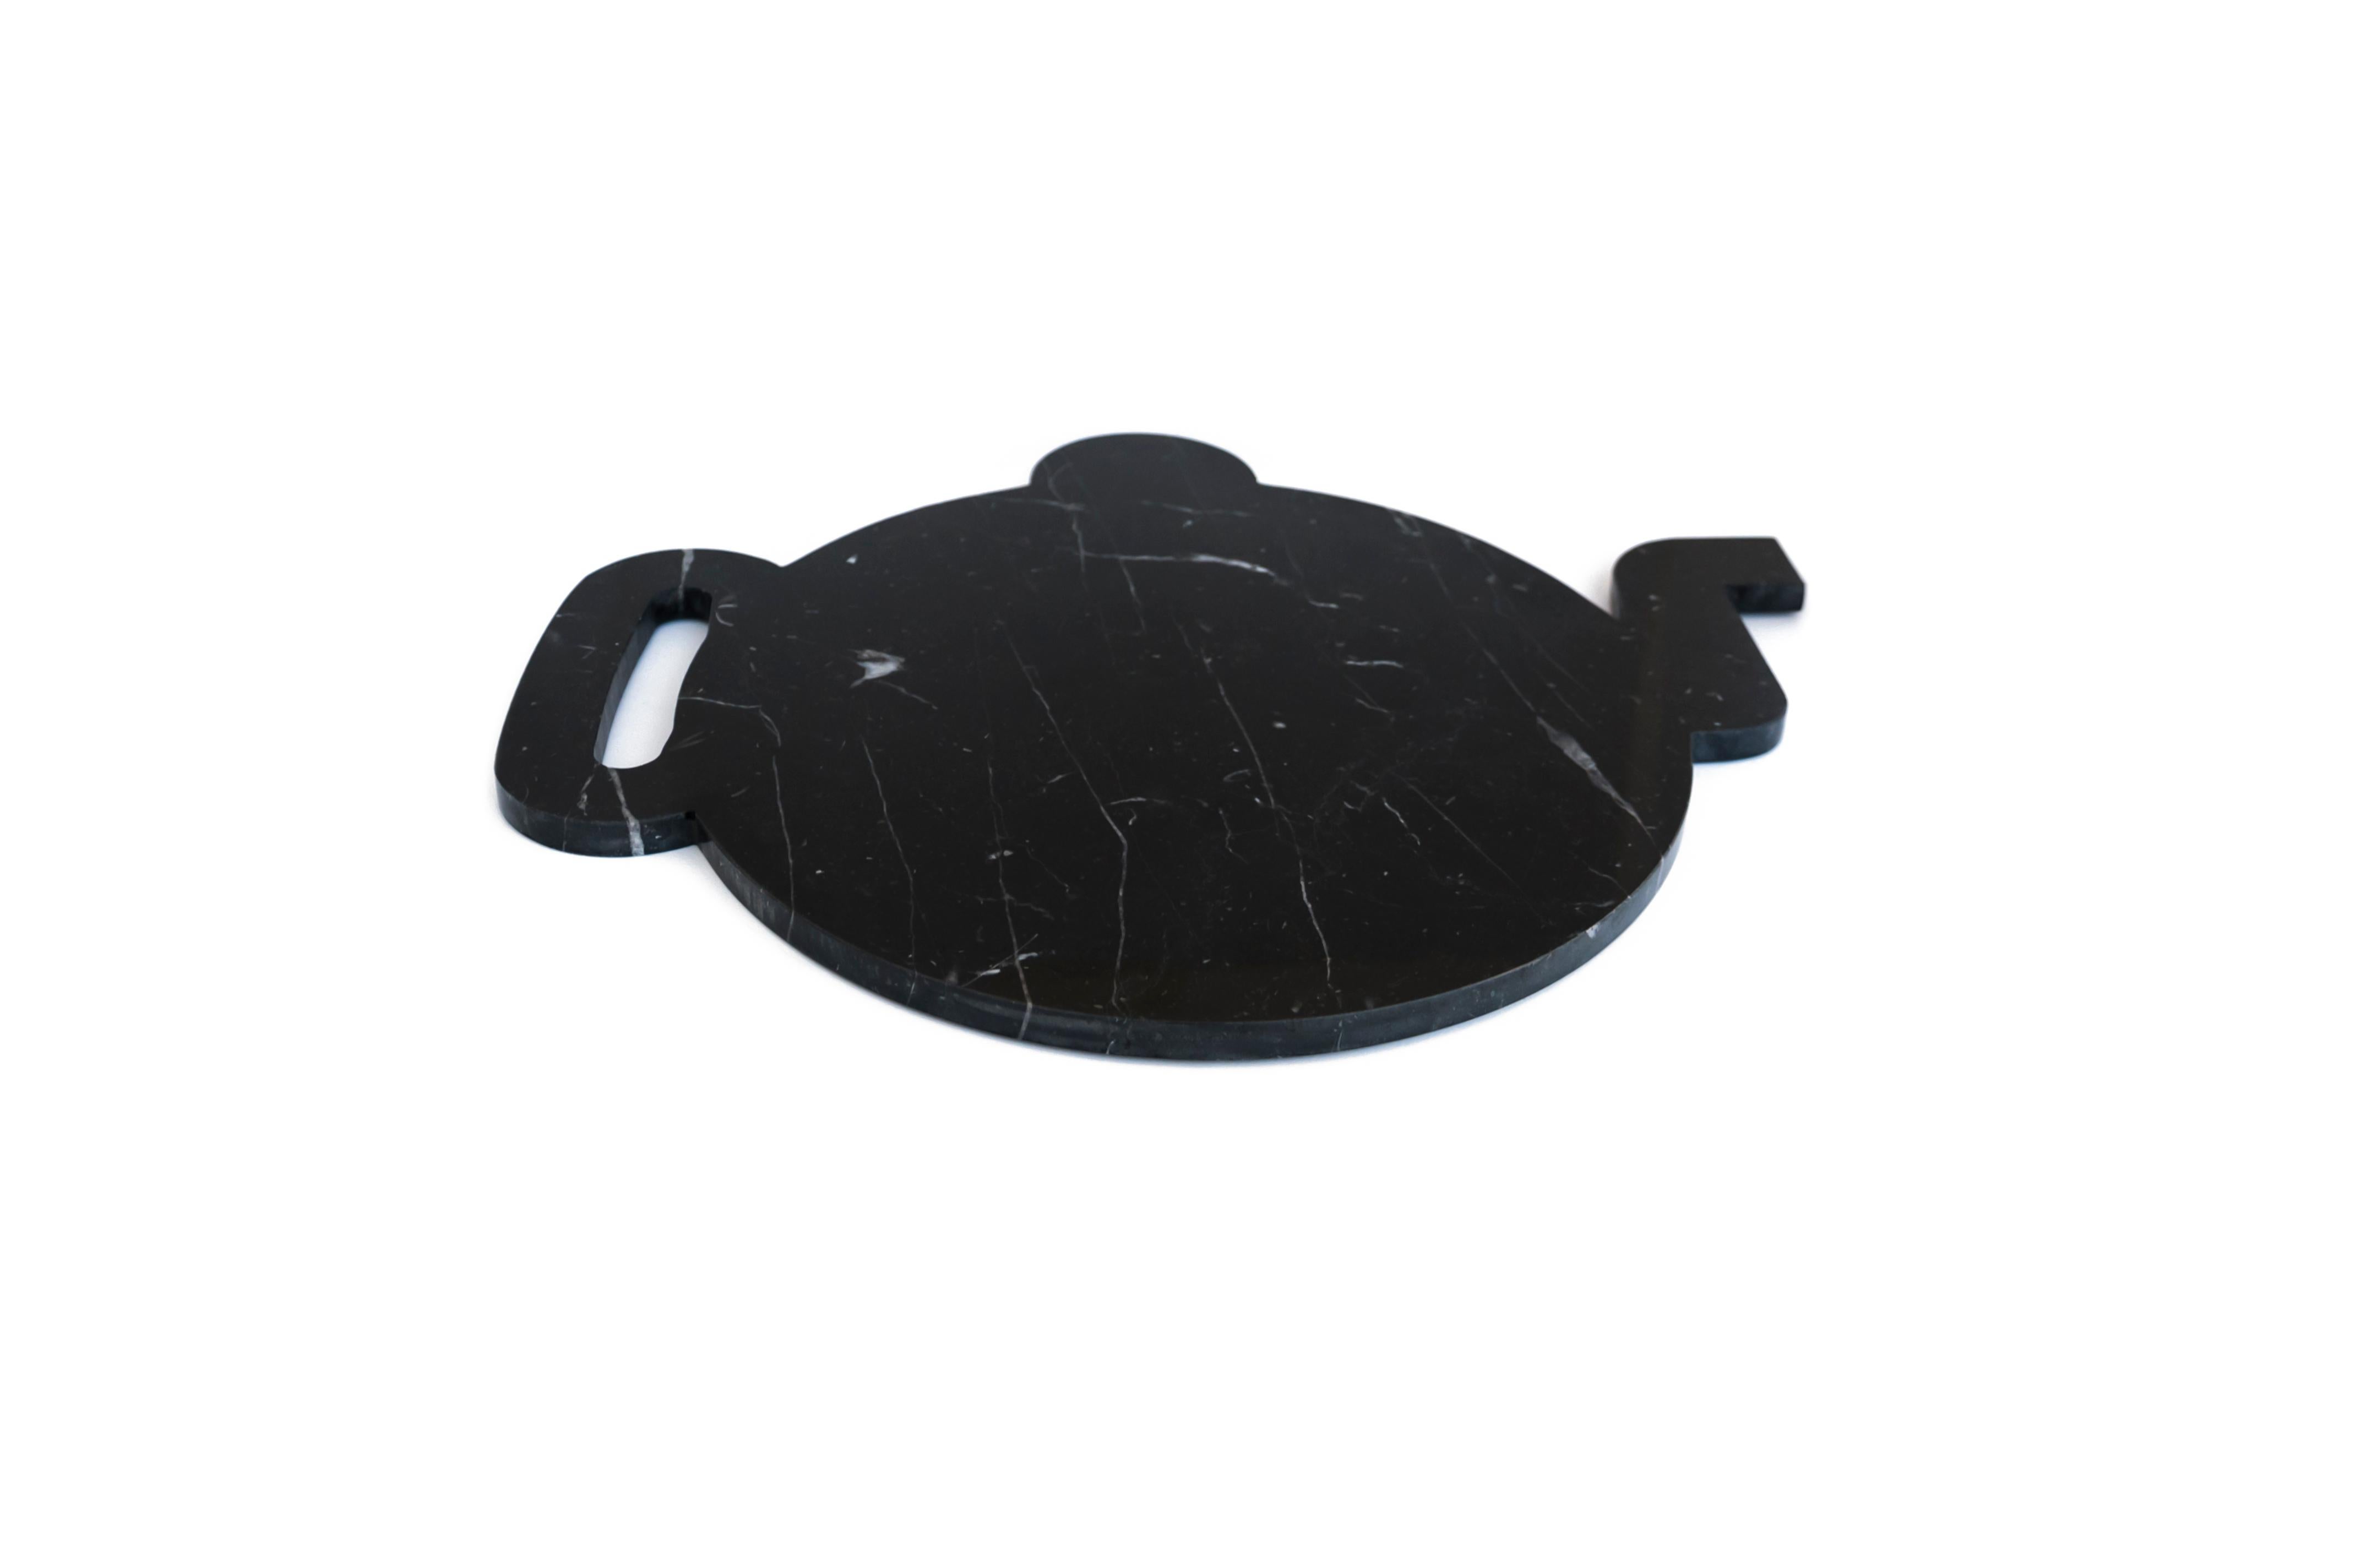 Black Marquina marble plate, tray and chopping board with the shape of a teapot. Each piece is in a way unique (every marble block is different in veins and shades) and handmade by Italian artisans specialized over generations in processing marble.